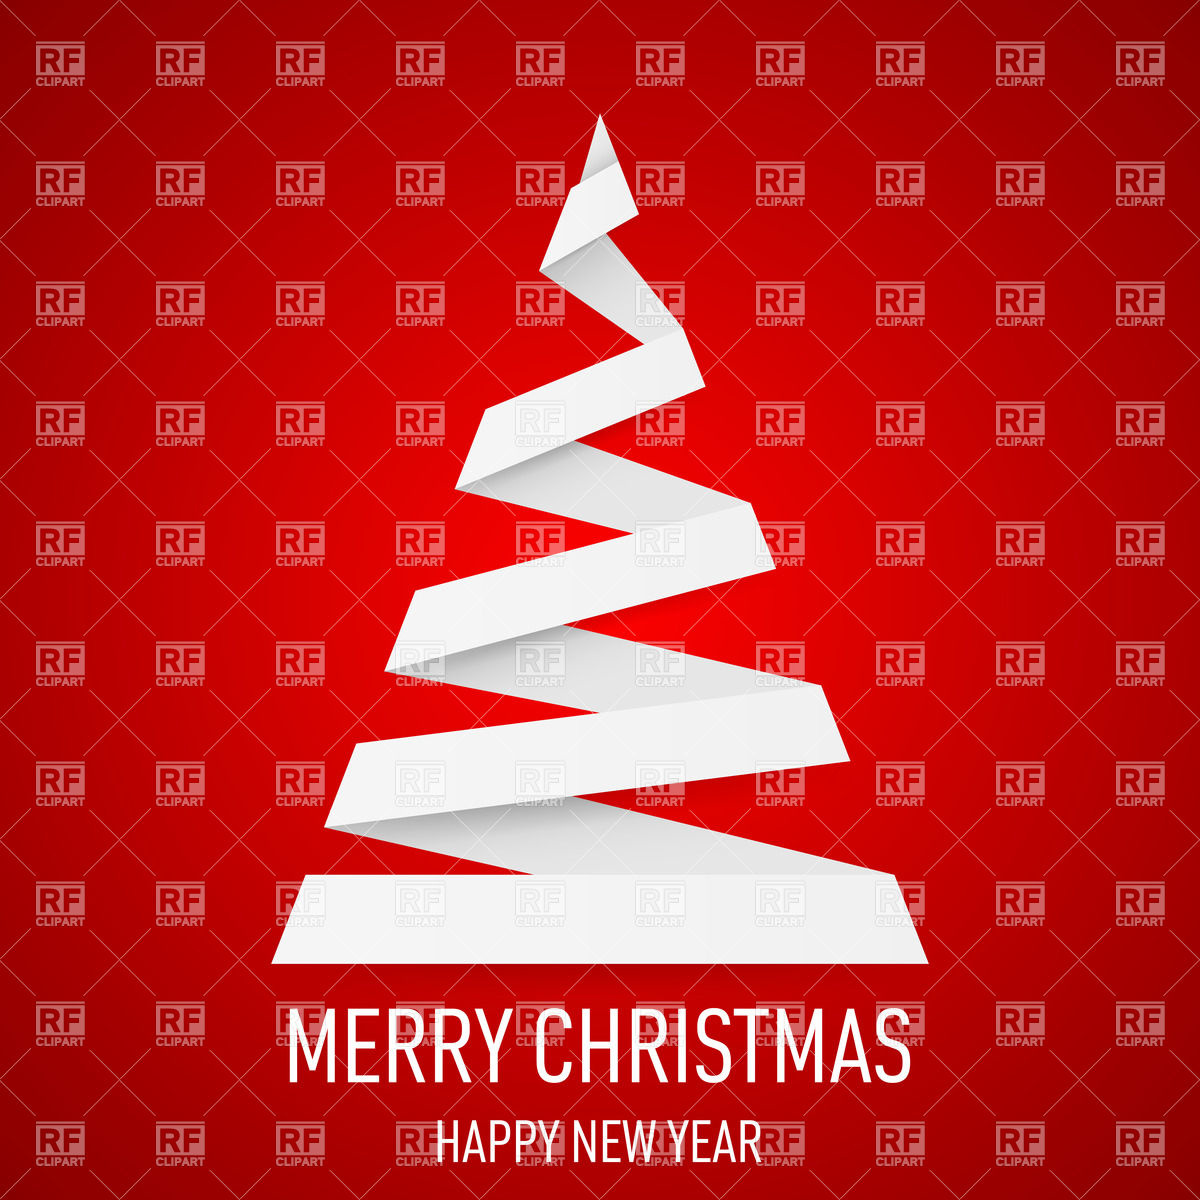 White Christmas Tree In Origami Style On Red Background 26182 Design